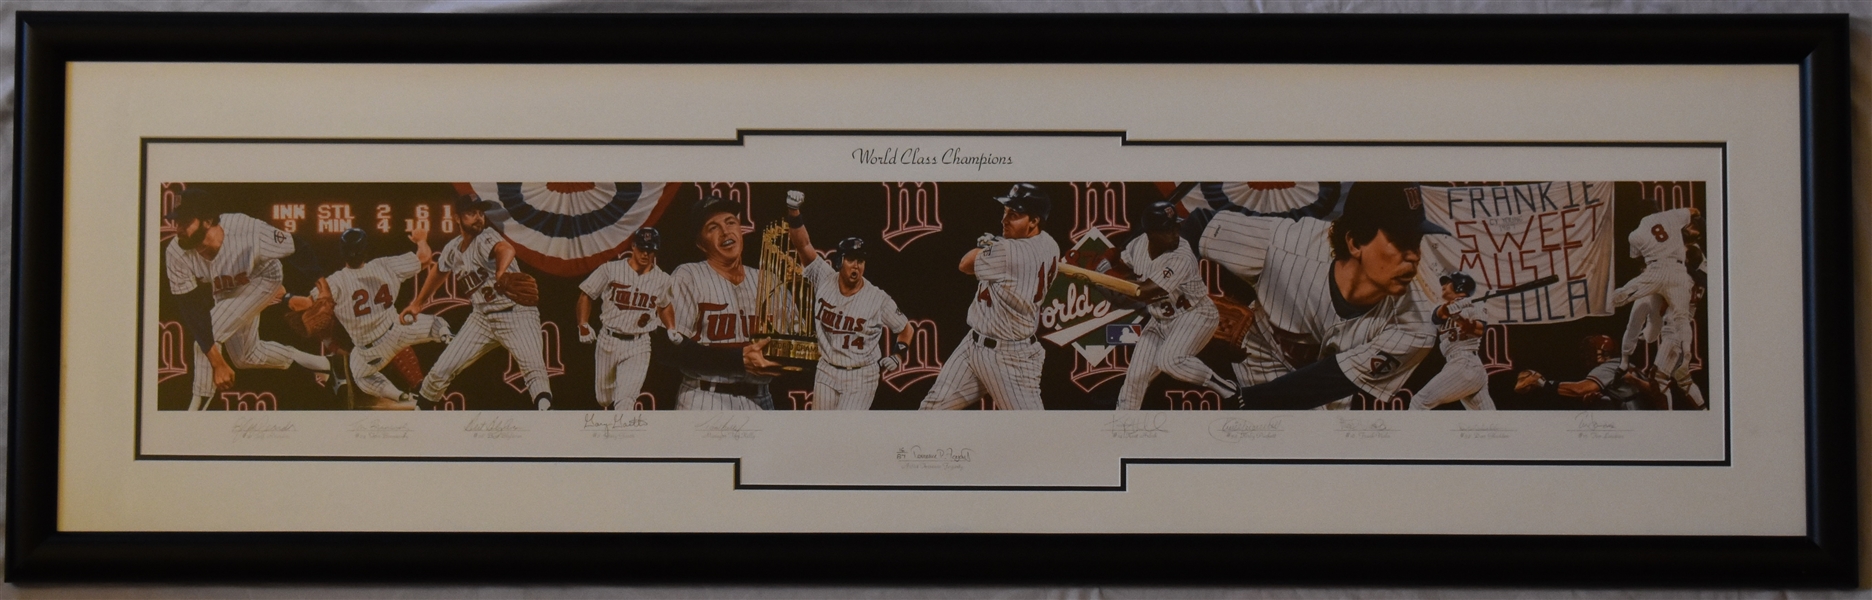 Frank Violas 1987 "World Class Champions" Team Signed Lithograph by Terrence Fogarty #16/87 w/Twins LOA